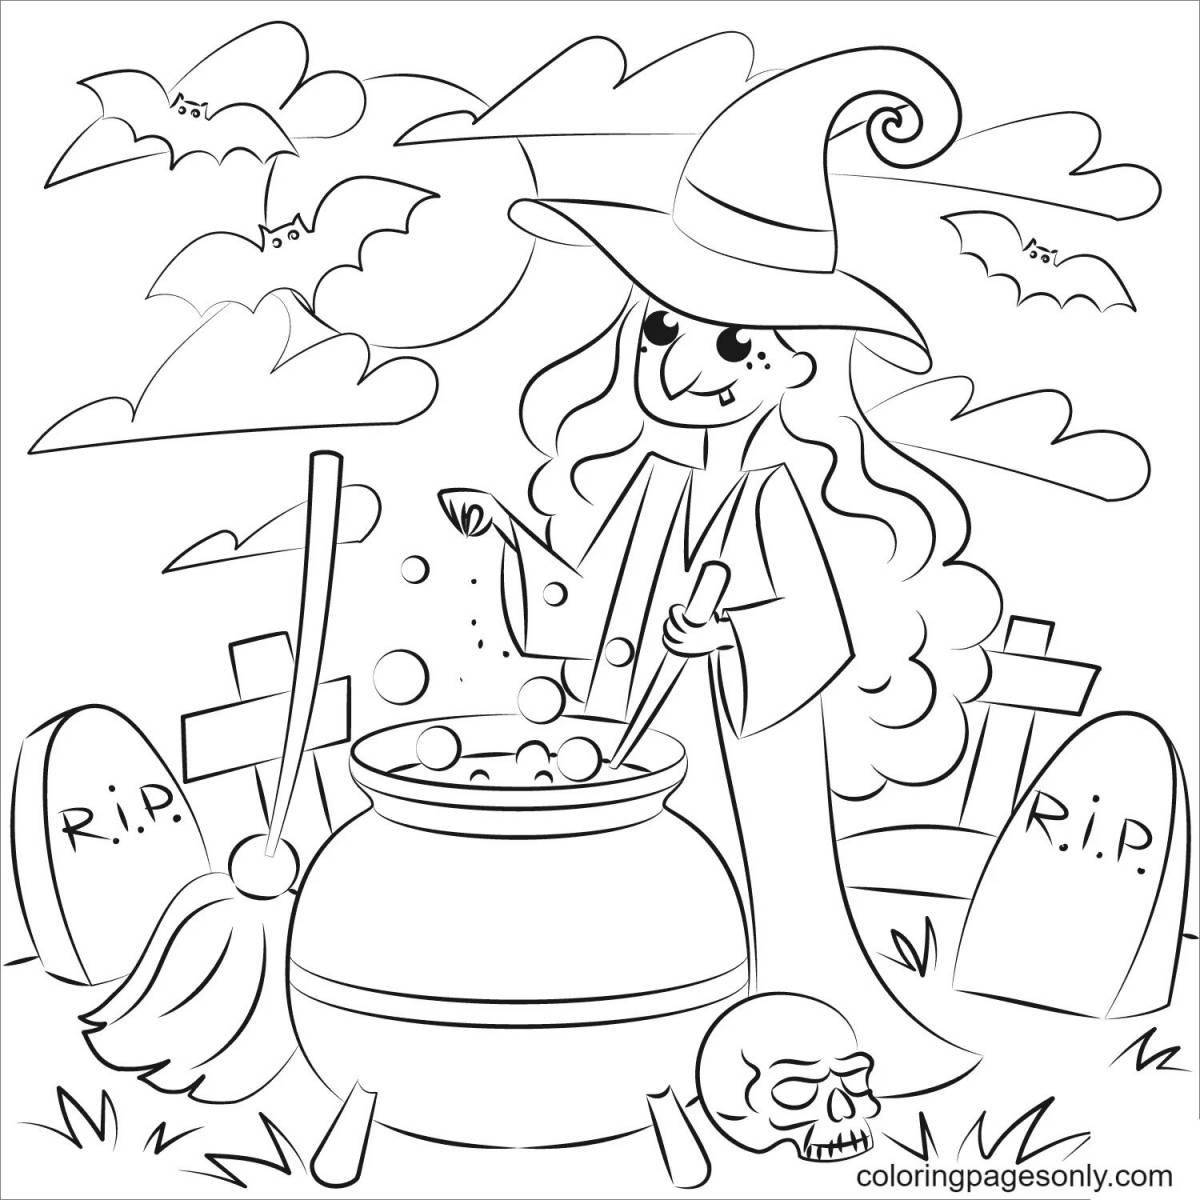 Supernatural coloring book for real witches